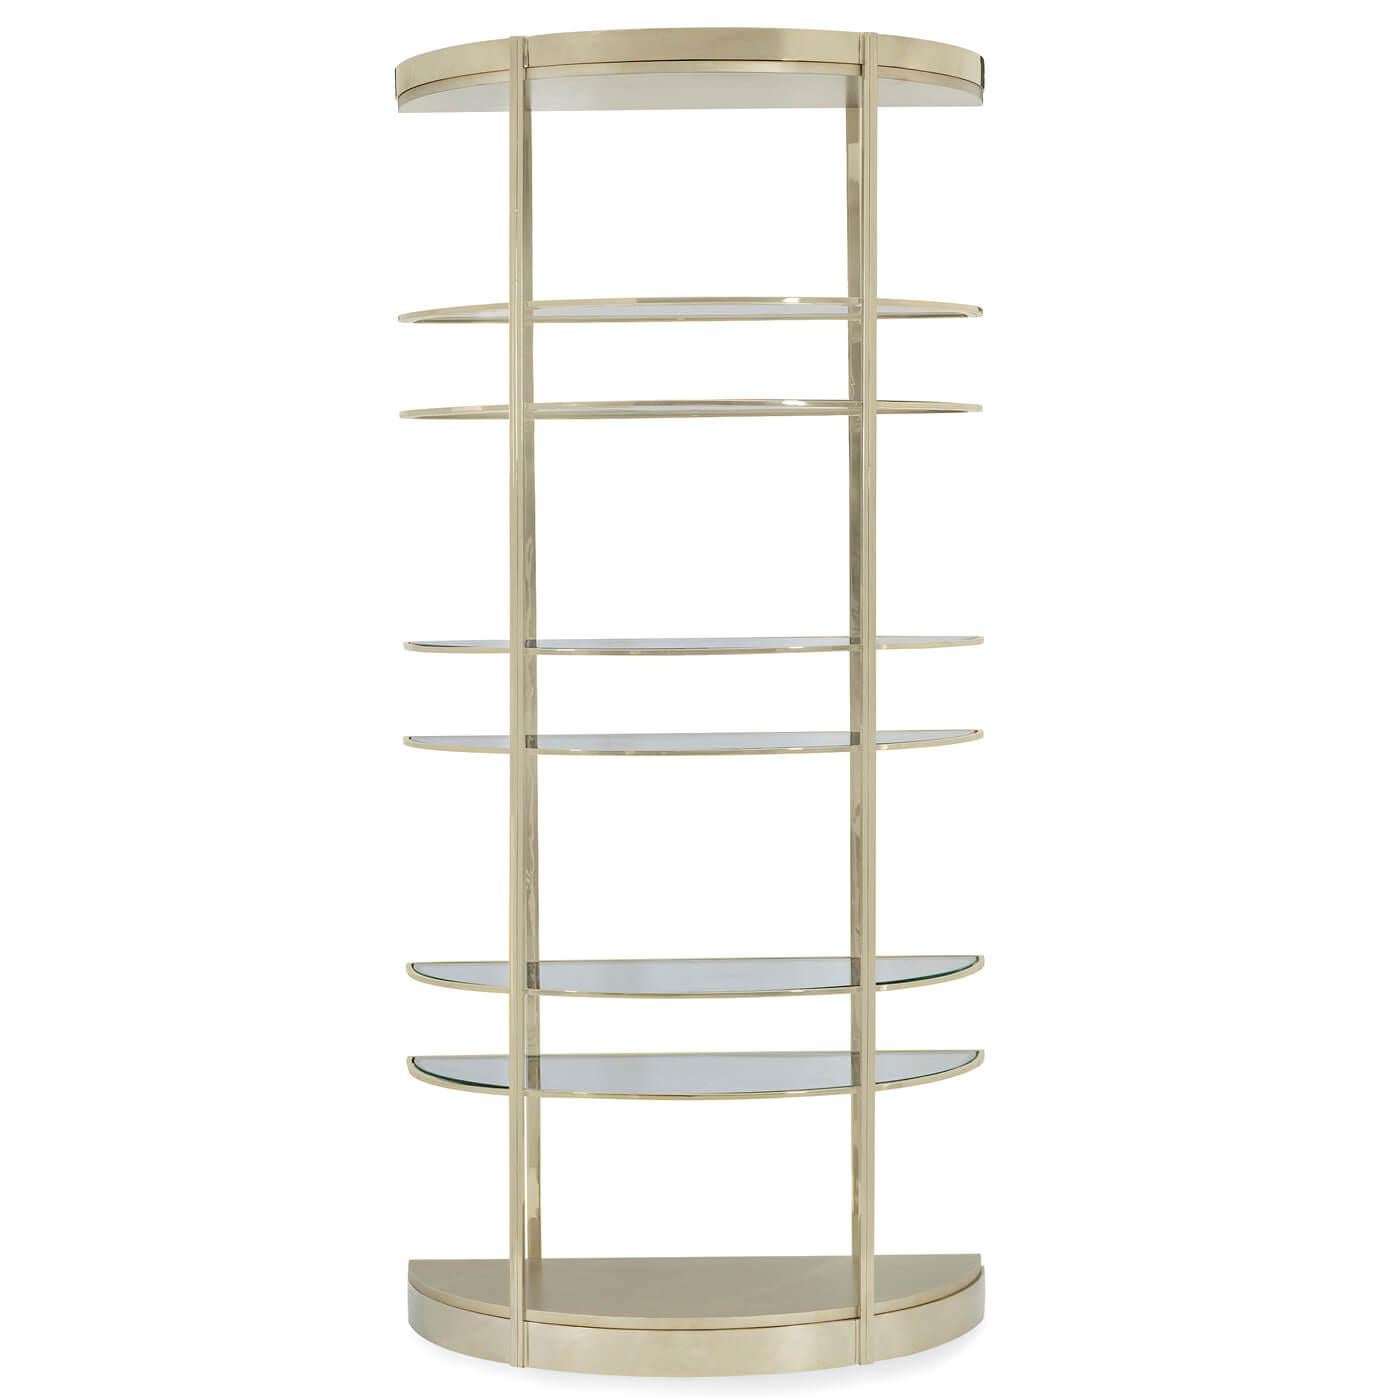 A contemporary-style half-moon etagere with a light and airy design. The tall frame has been given a high polished gold finish and surrounds each of the six semi-circular glass shelves. 

Dimensions
39